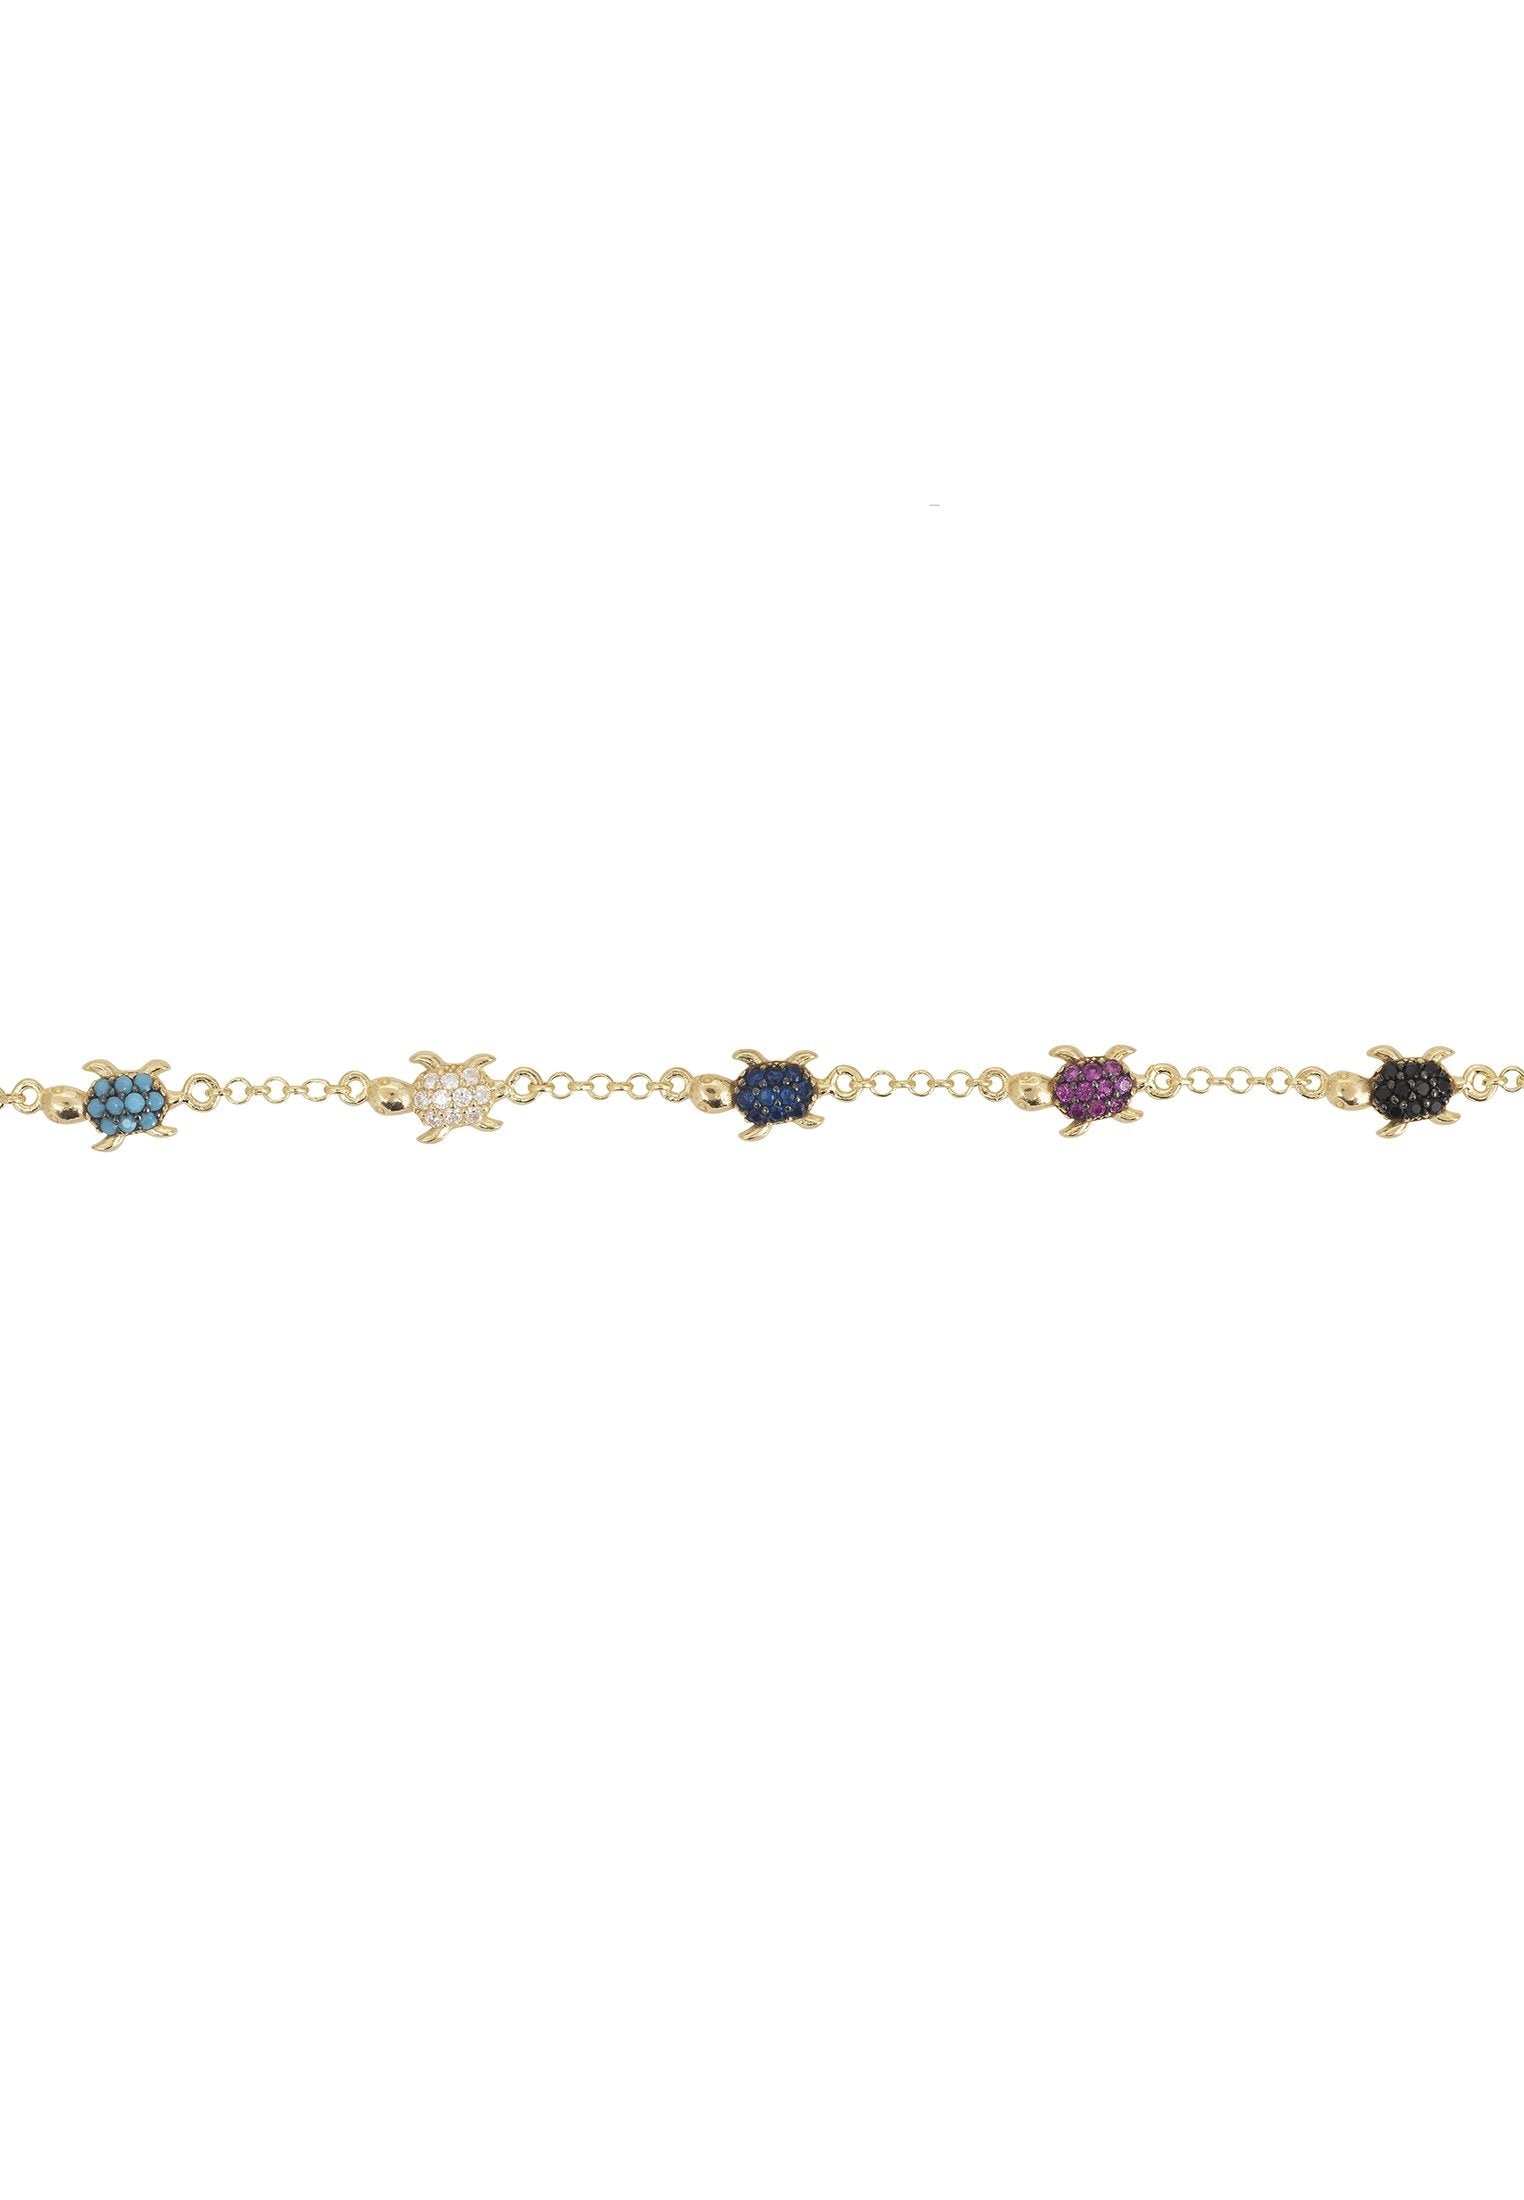 Colorful Turtle Bracelet with Zirconia Stones - Symbol of Good Fortune and Longevity, Sterling Silver and Gold Plated Jewelry for Women Bijou Her